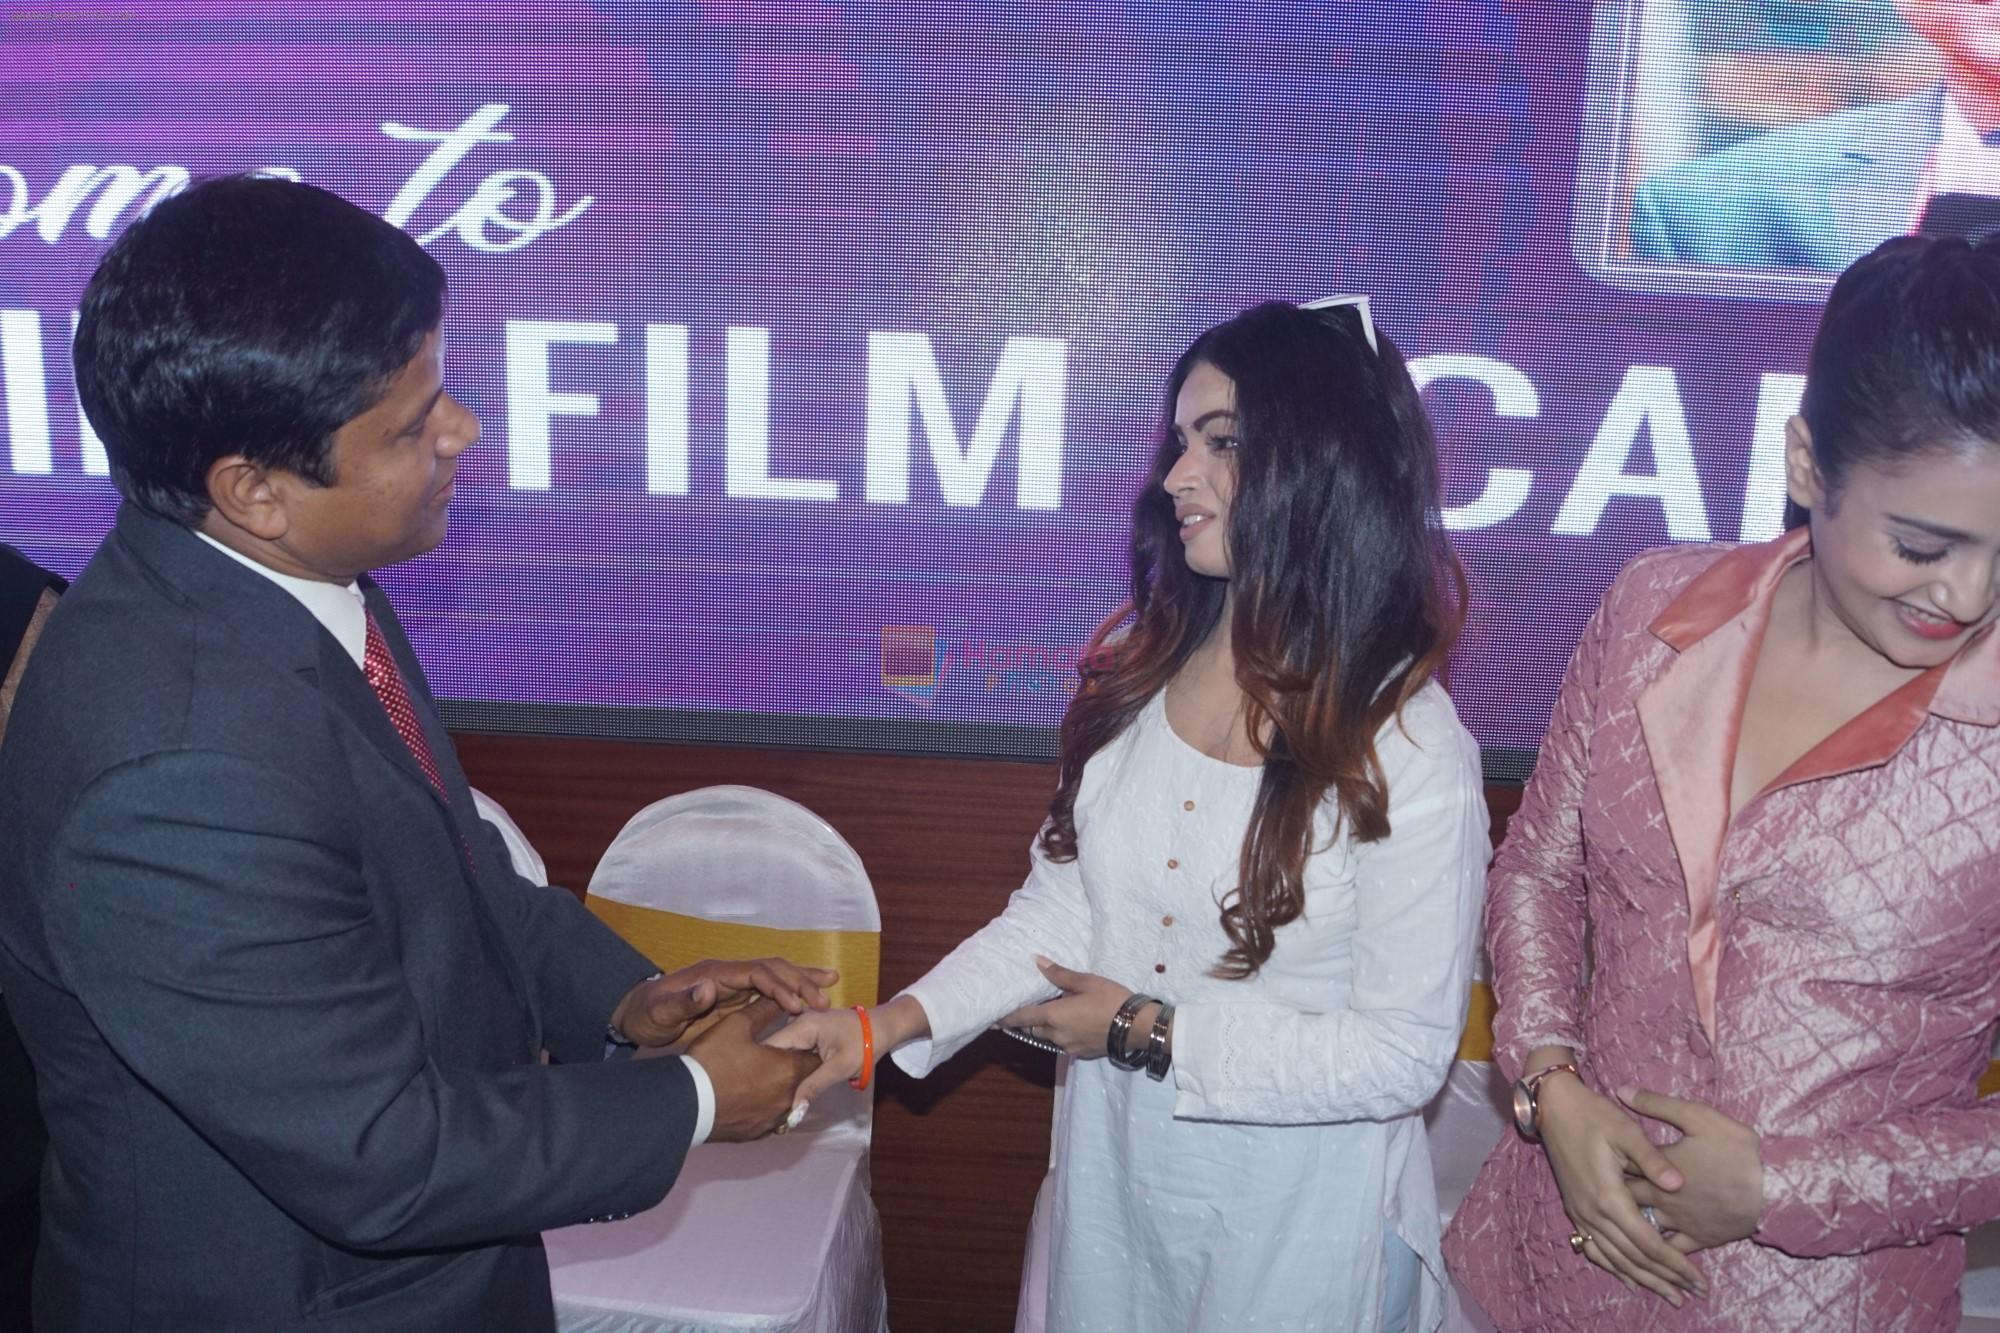 at the Launch of Dilip Sahu's Flyking film Academy on 26th Jan 2019